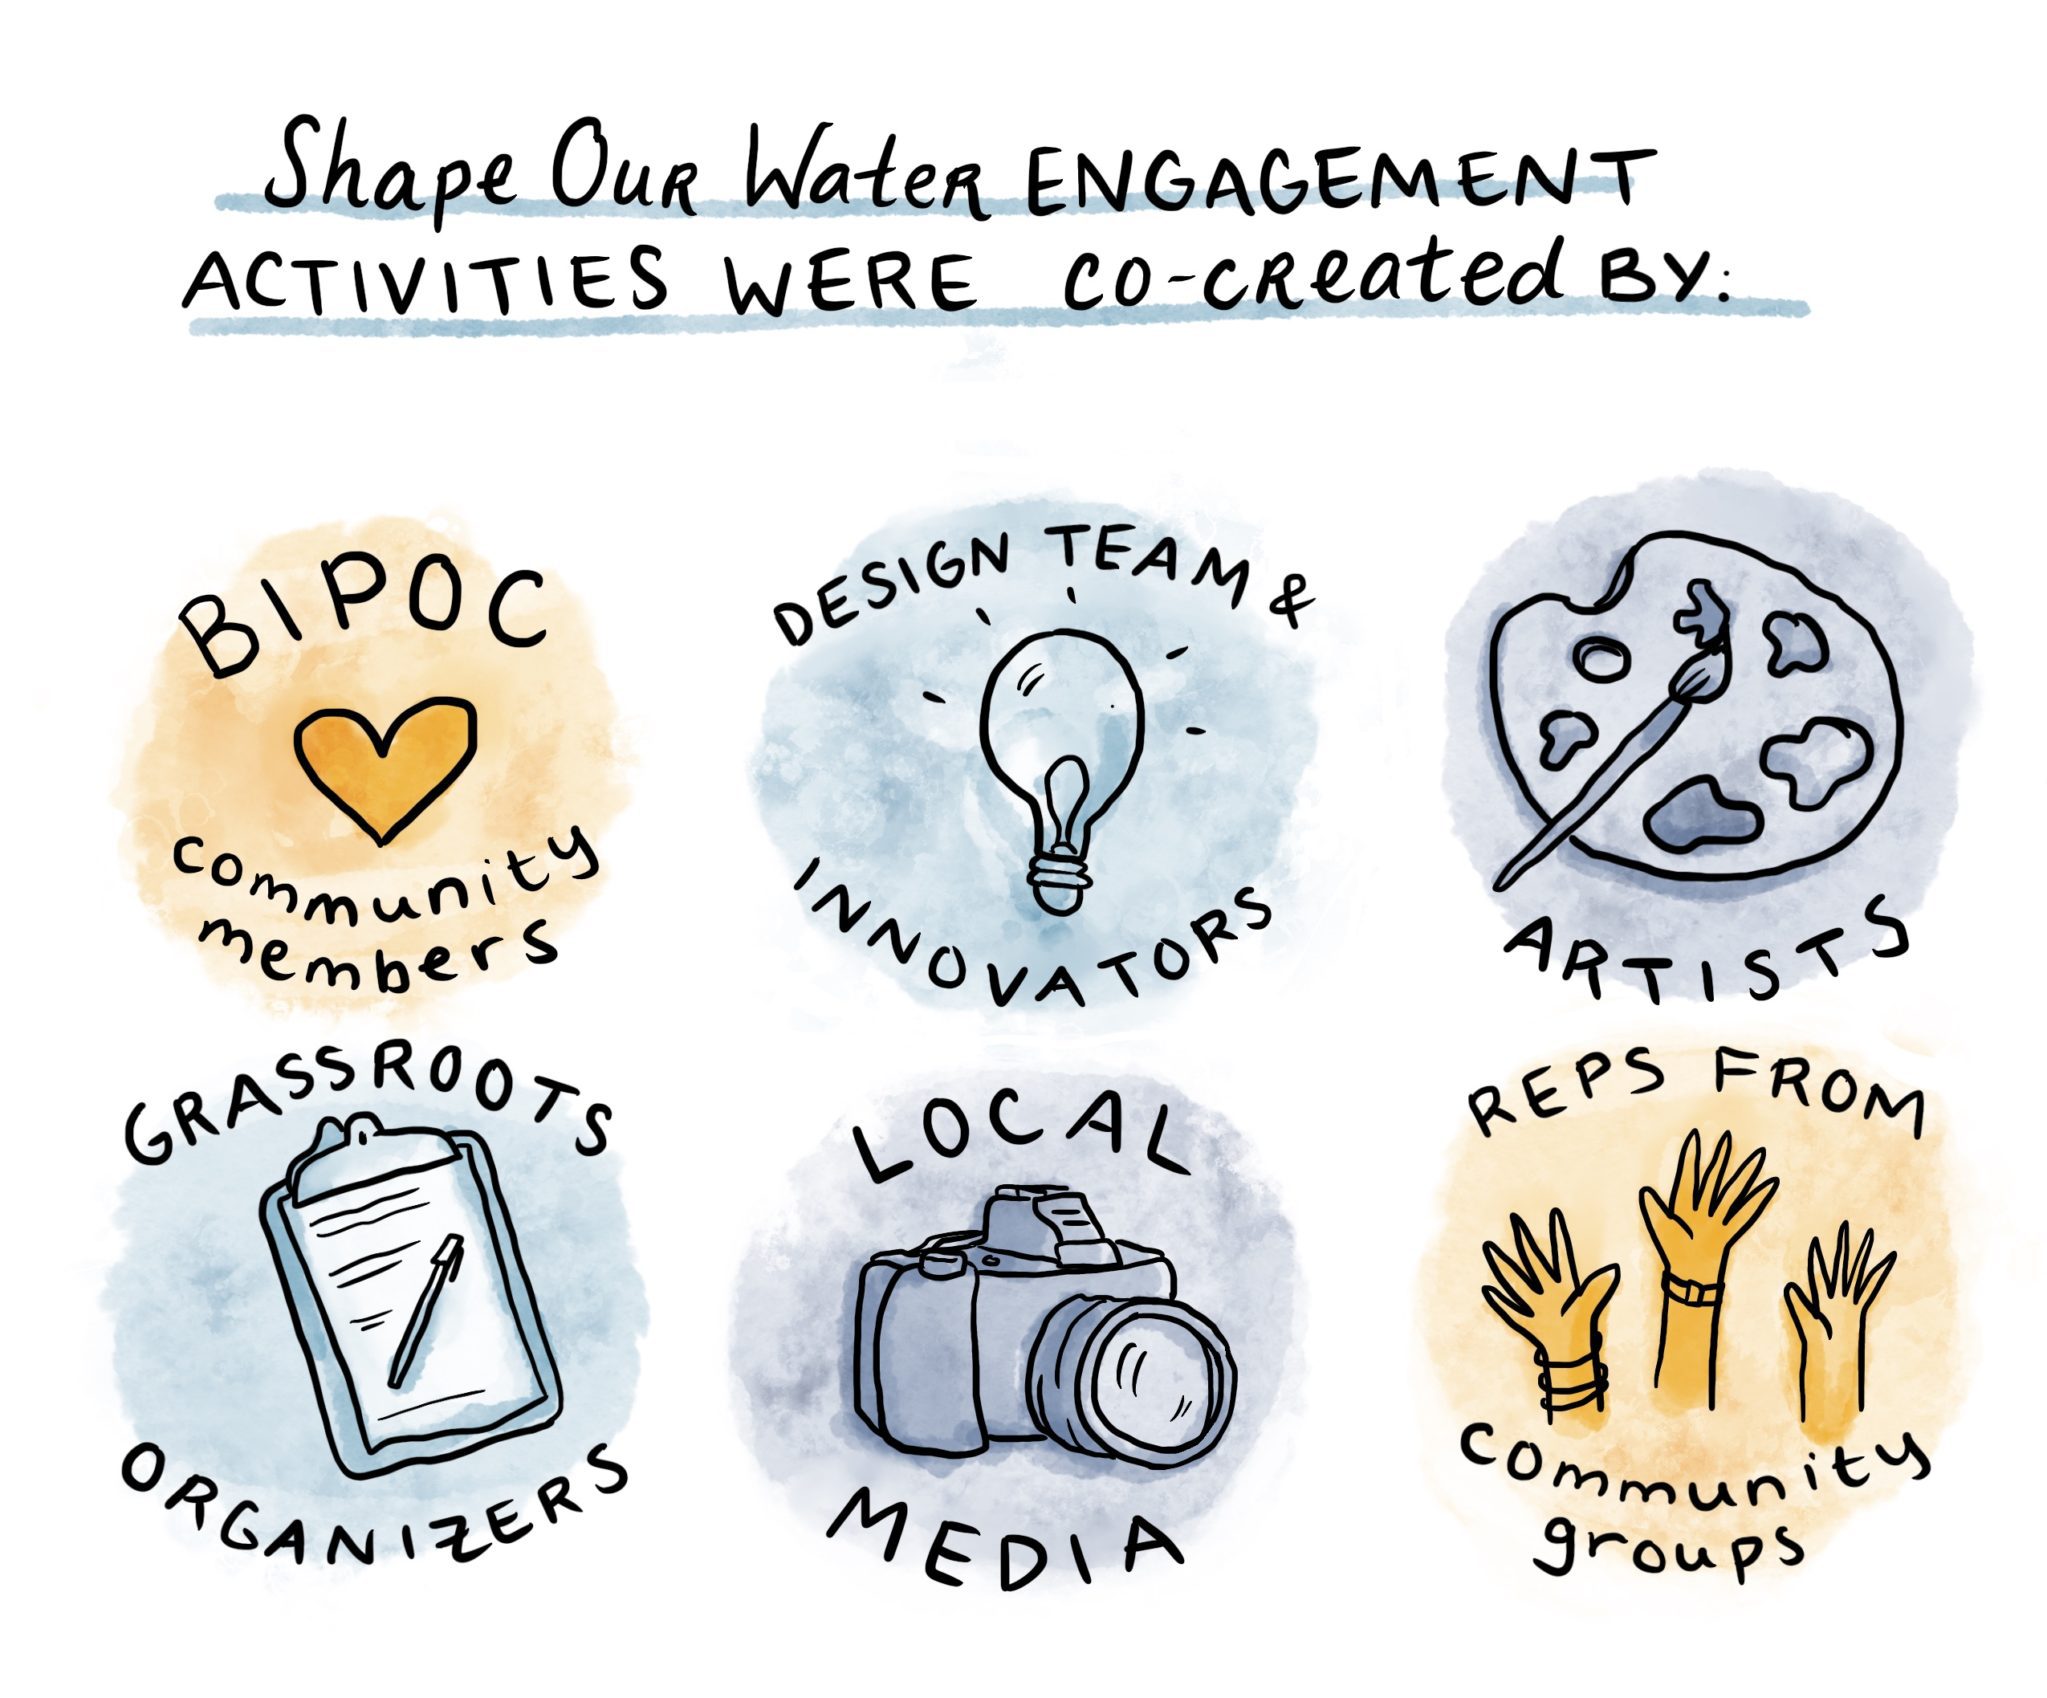 Drawing that says "Shape Our Water Engagement Activies were co-created by: BIPOC Community Members, Design Team and Innovators, Artists, Grassroots Organizers, Local Media, Reps from Community Groups" 